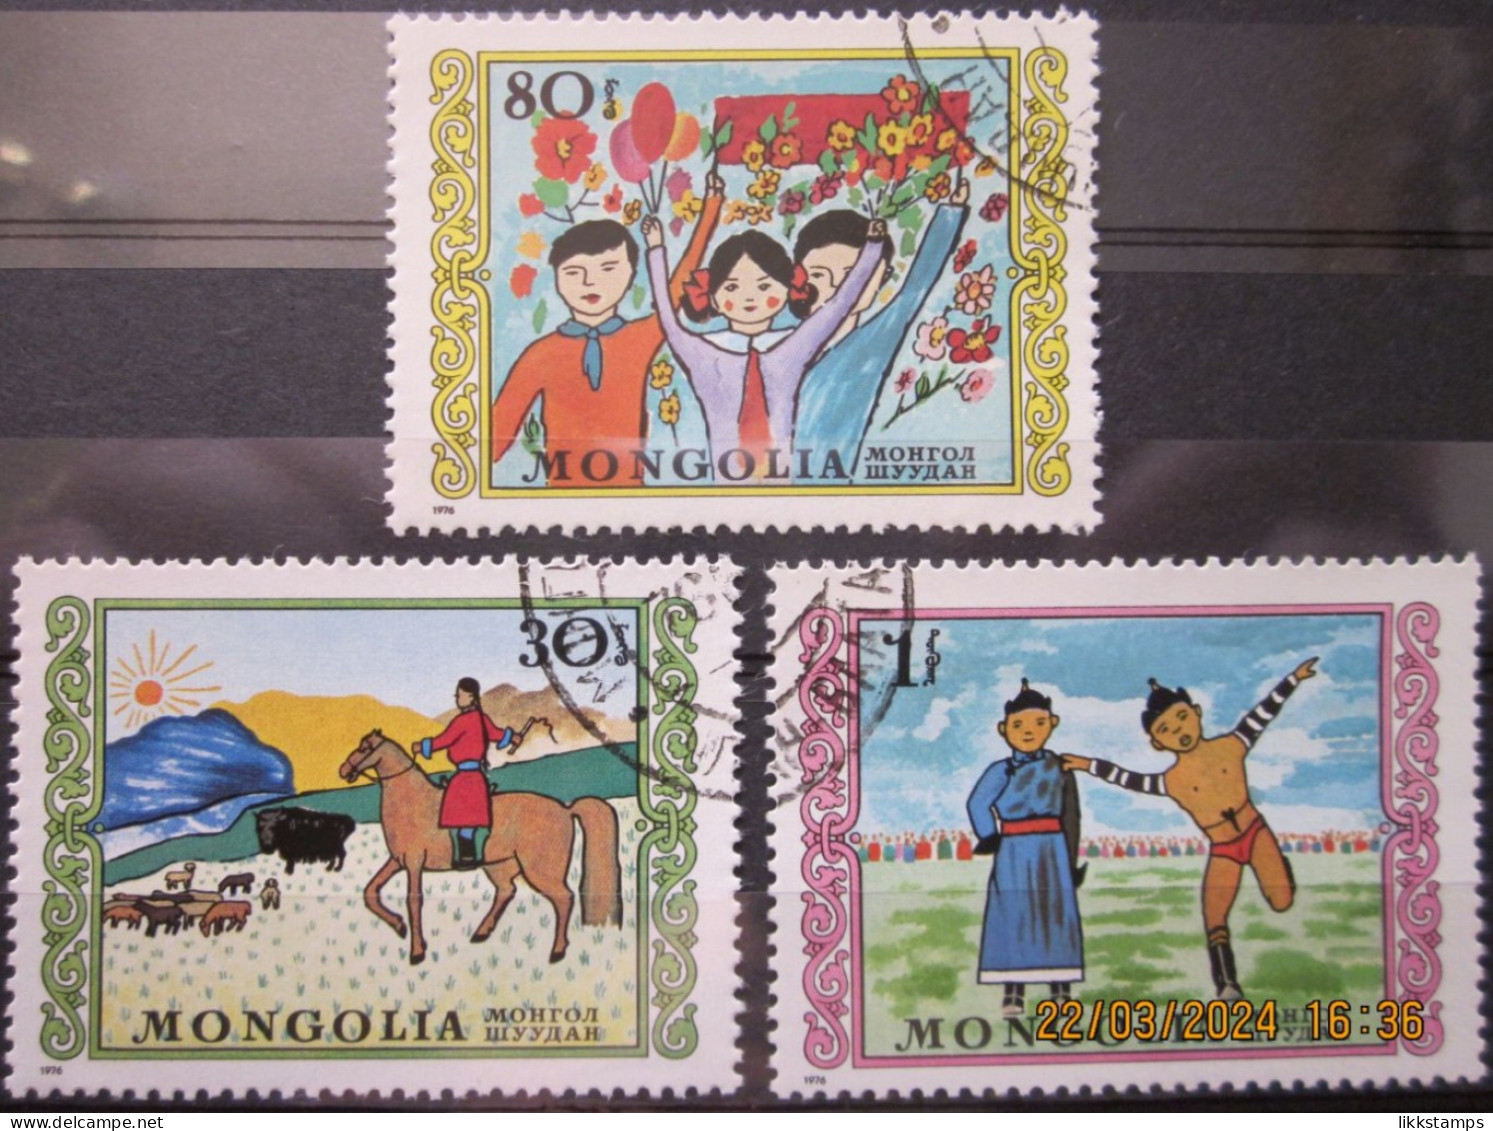 MONGOLIA ~ 1976 ~ S.G. NUMBERS 981 + 984 - 985, ~ CHILDRENS DAY. ~ VFU #03477 - Mongolië